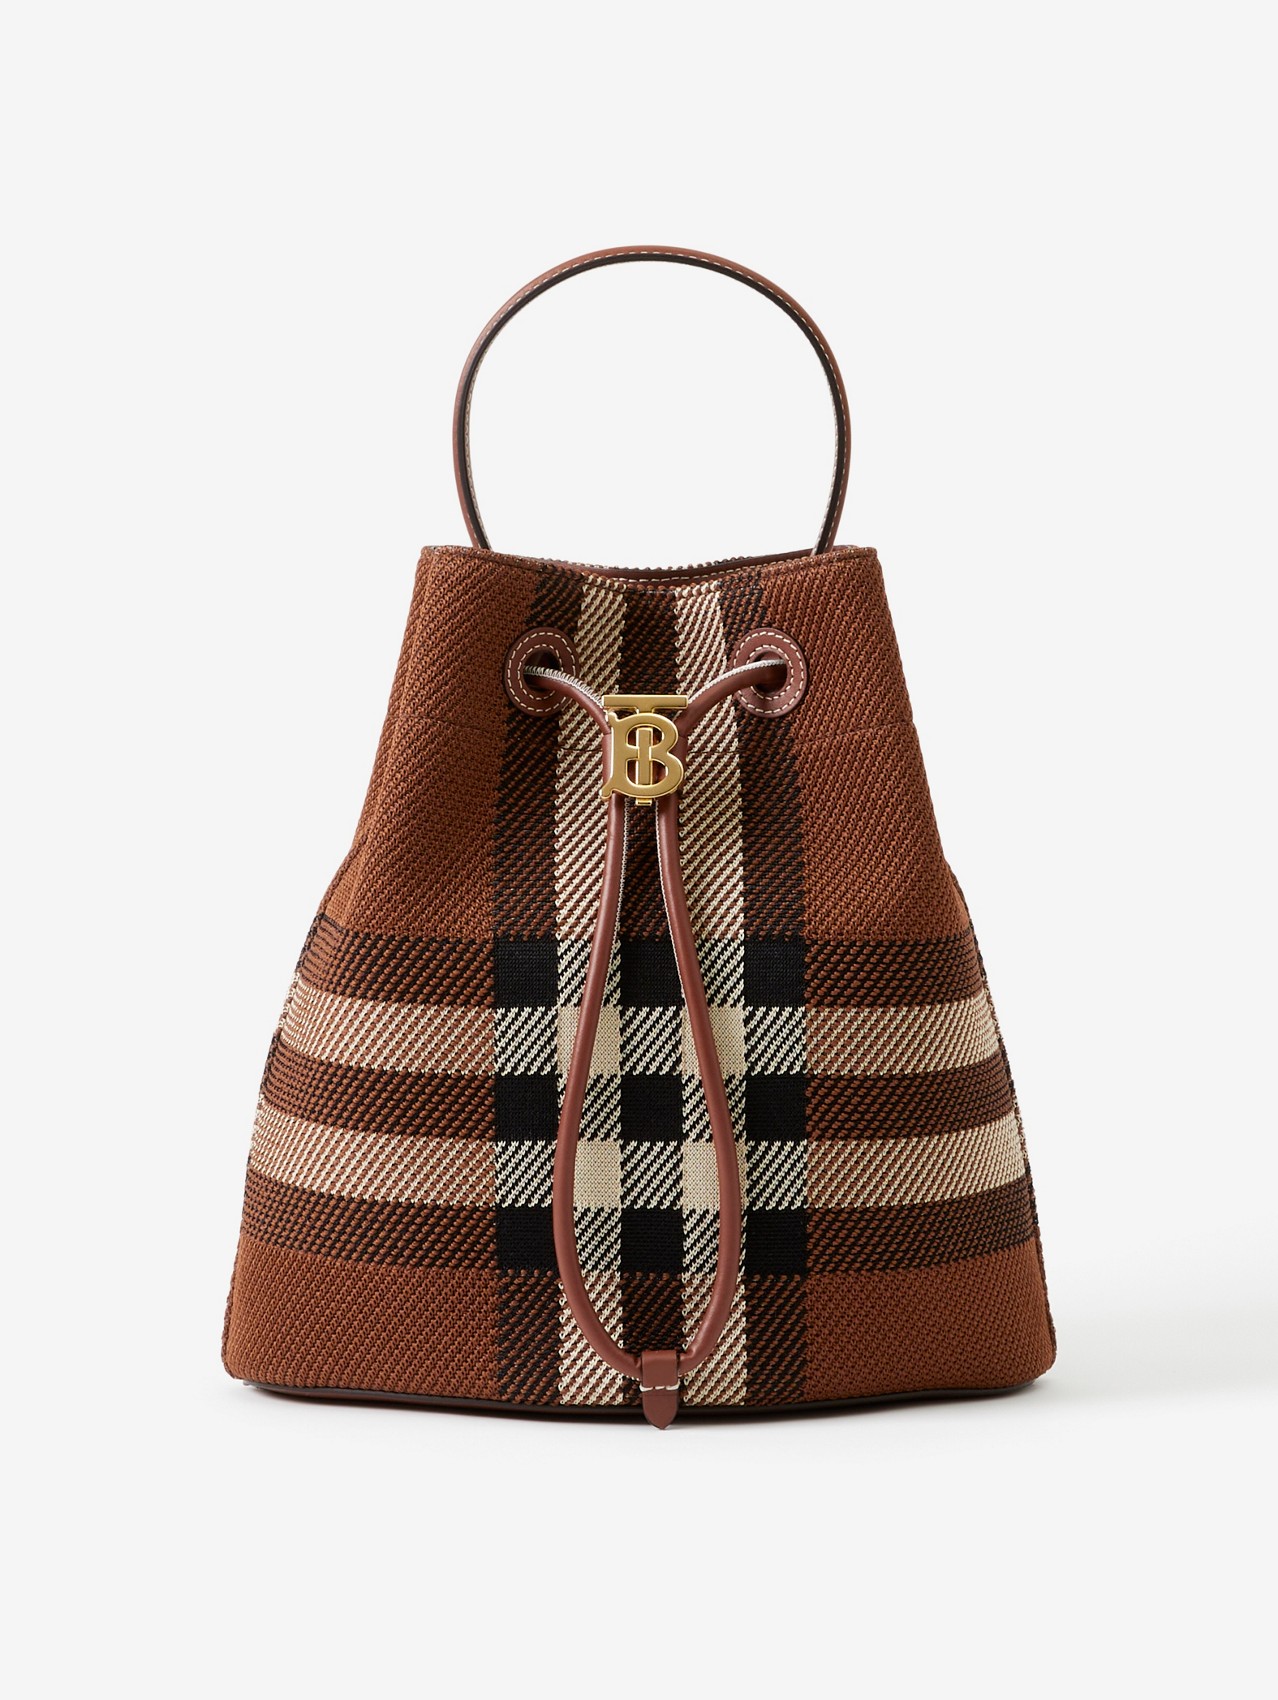 The TB Bag Collection | Burberry® Official